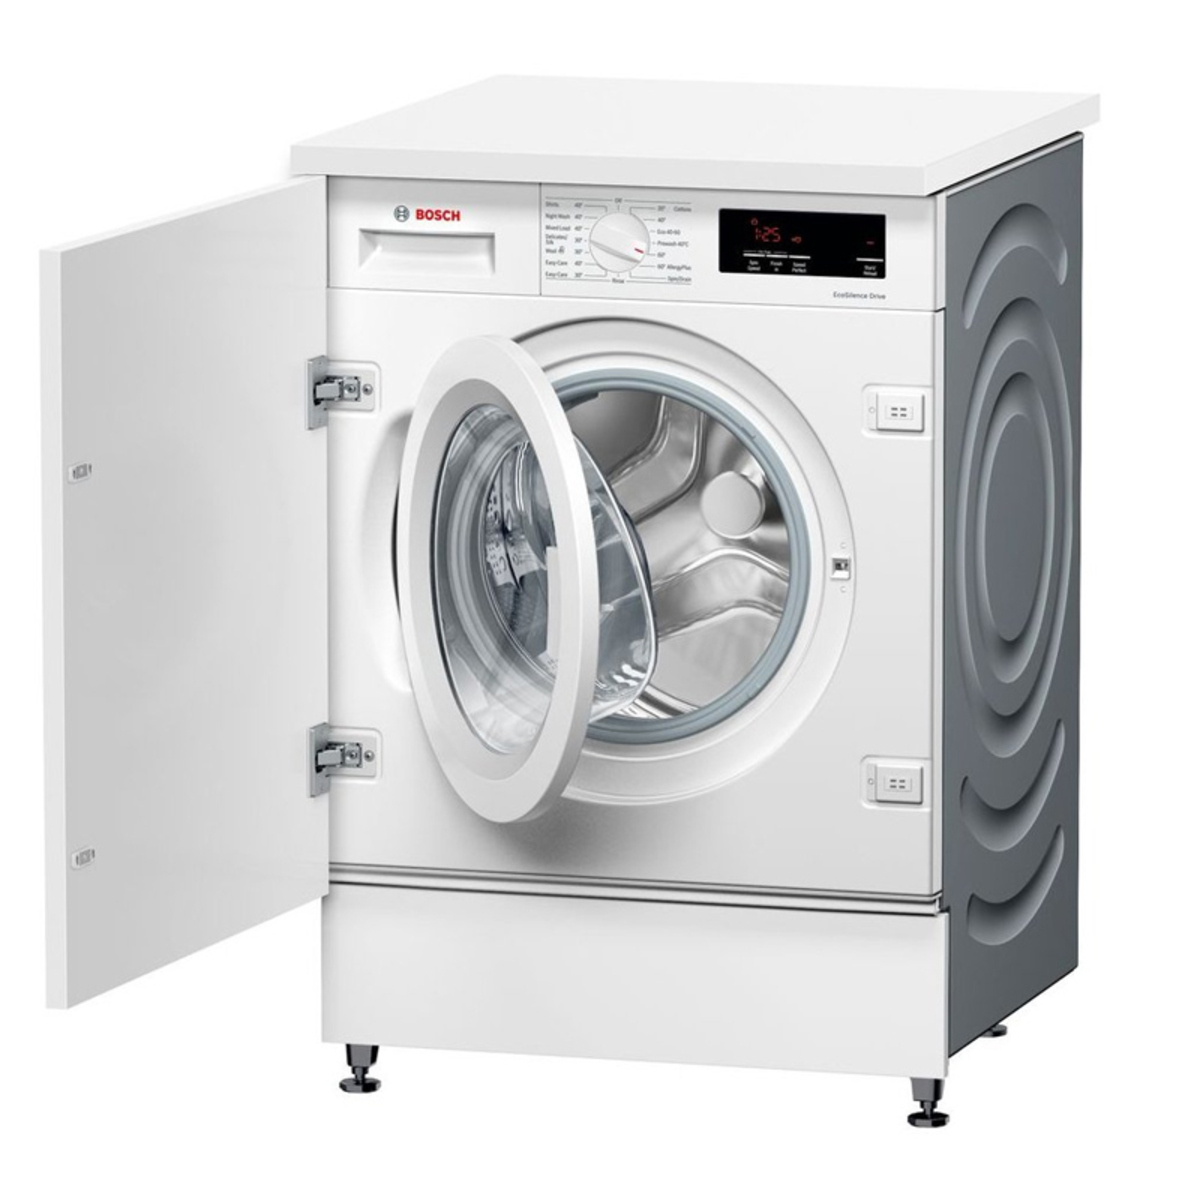 Bosch WIW28302GB C Rated 8kg 1400 Spin Integrated Washing Machine